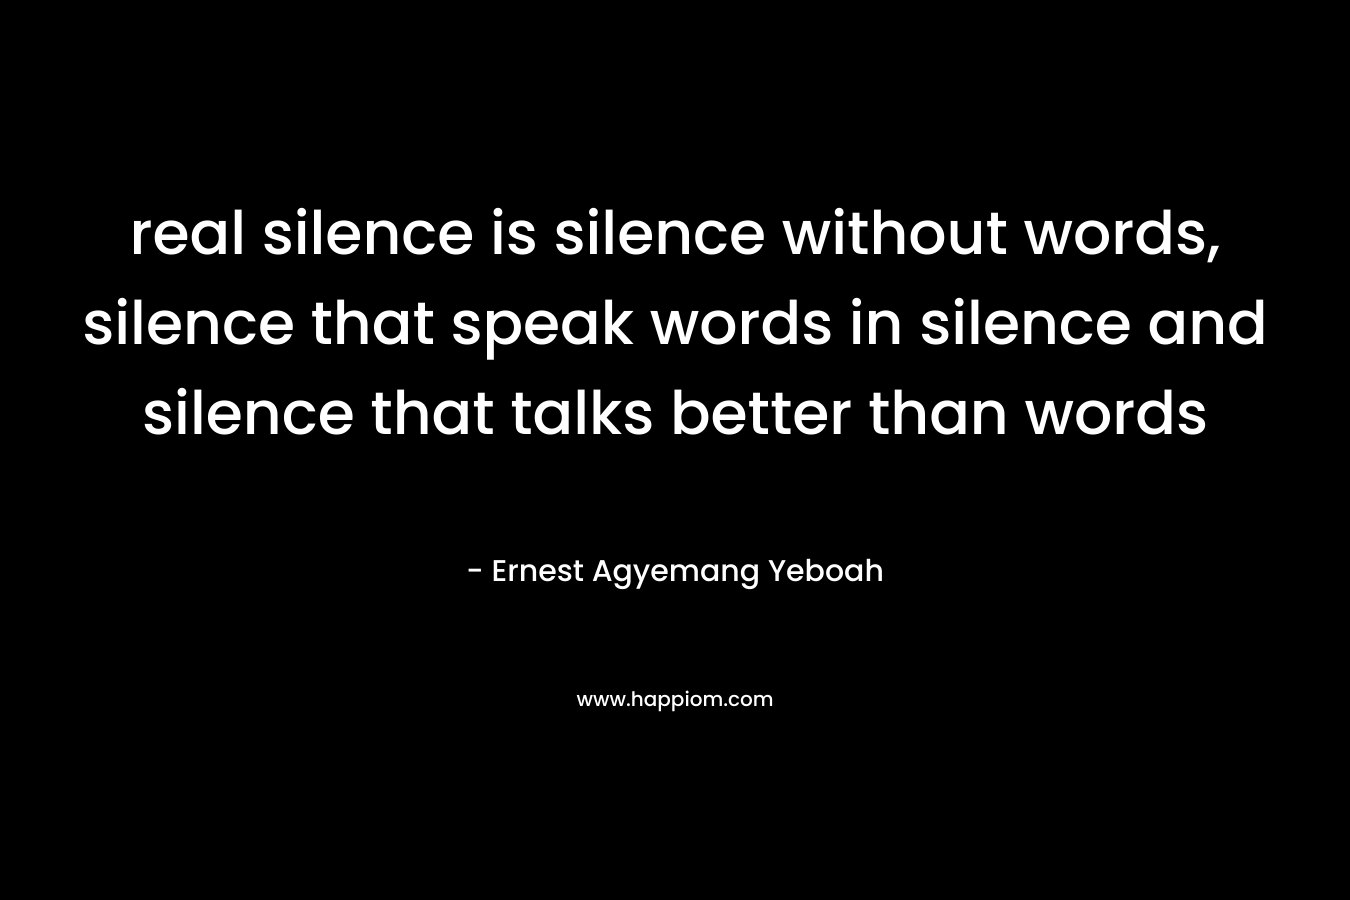 real silence is silence without words, silence that speak words in silence and silence that talks better than words – Ernest Agyemang Yeboah